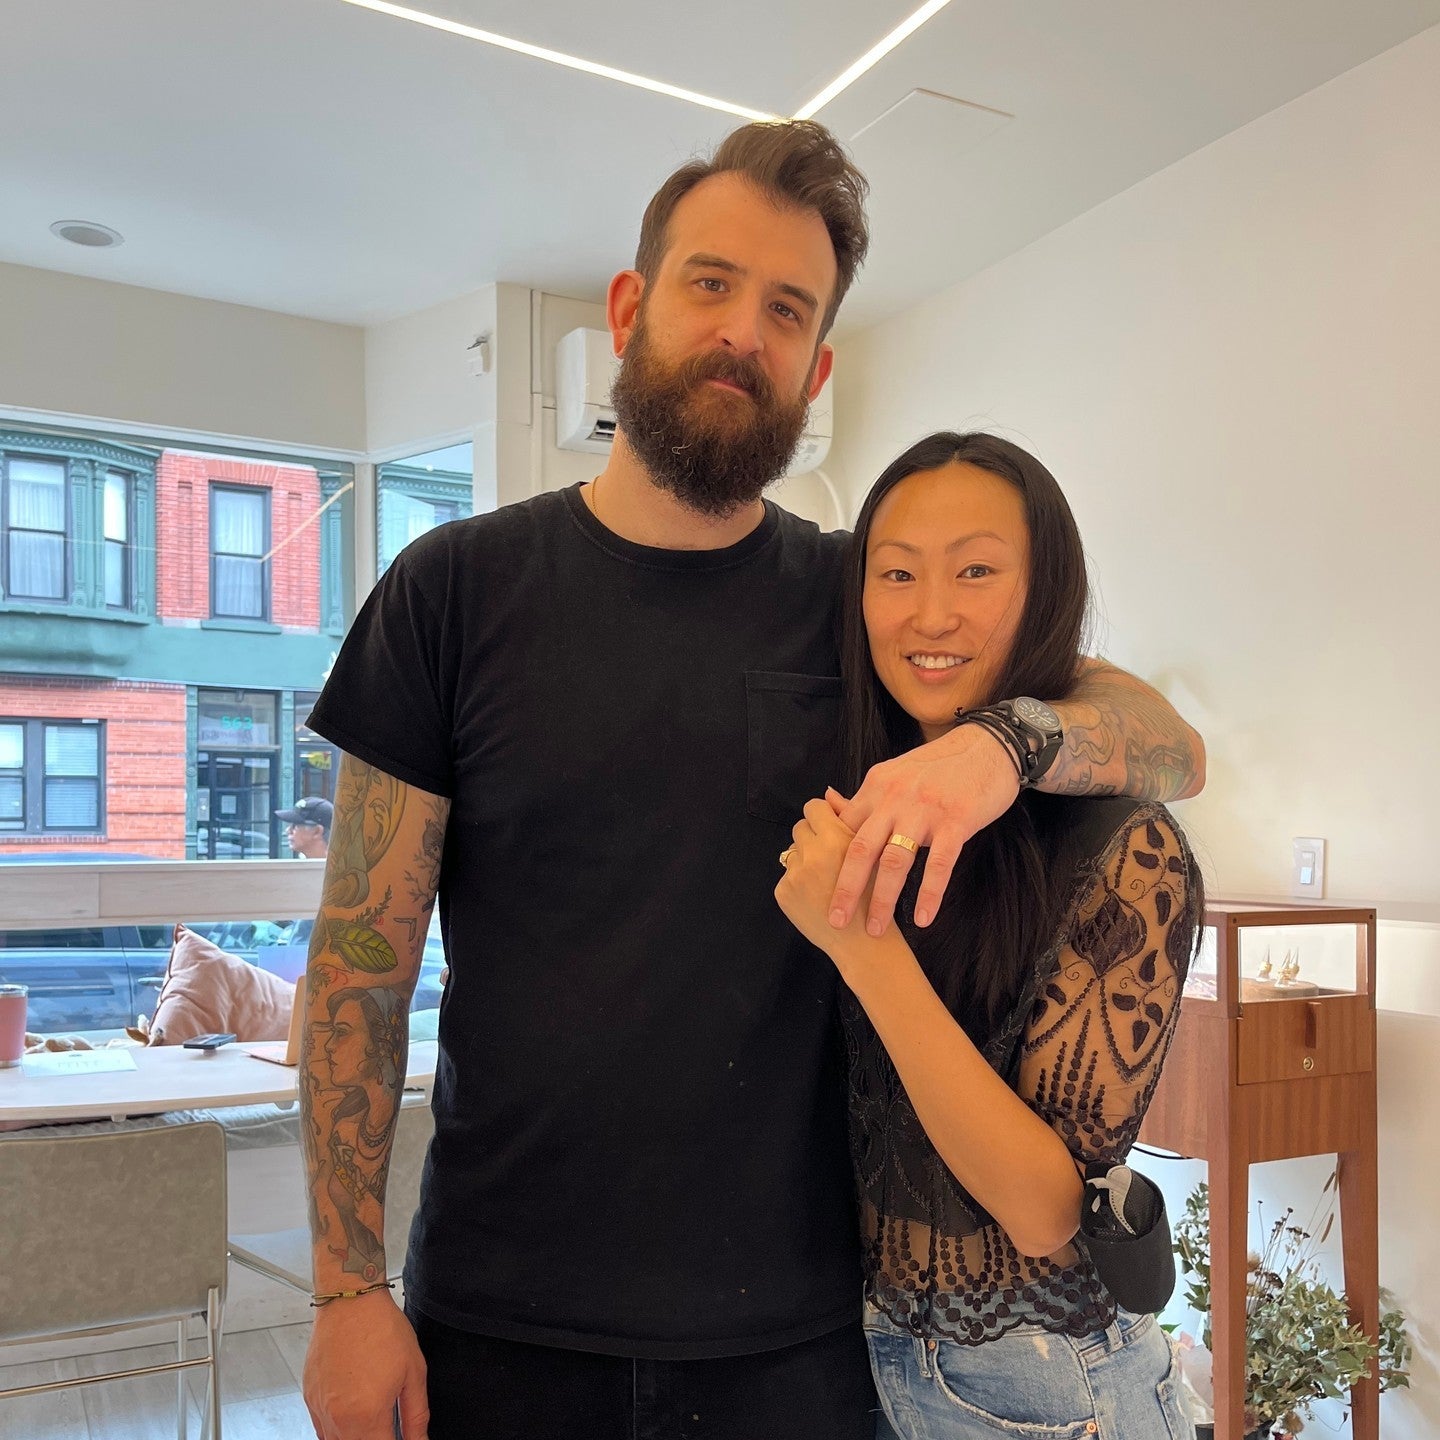 Jenna and josh holding eachother in our showroom while showcasing their new engagement rings.